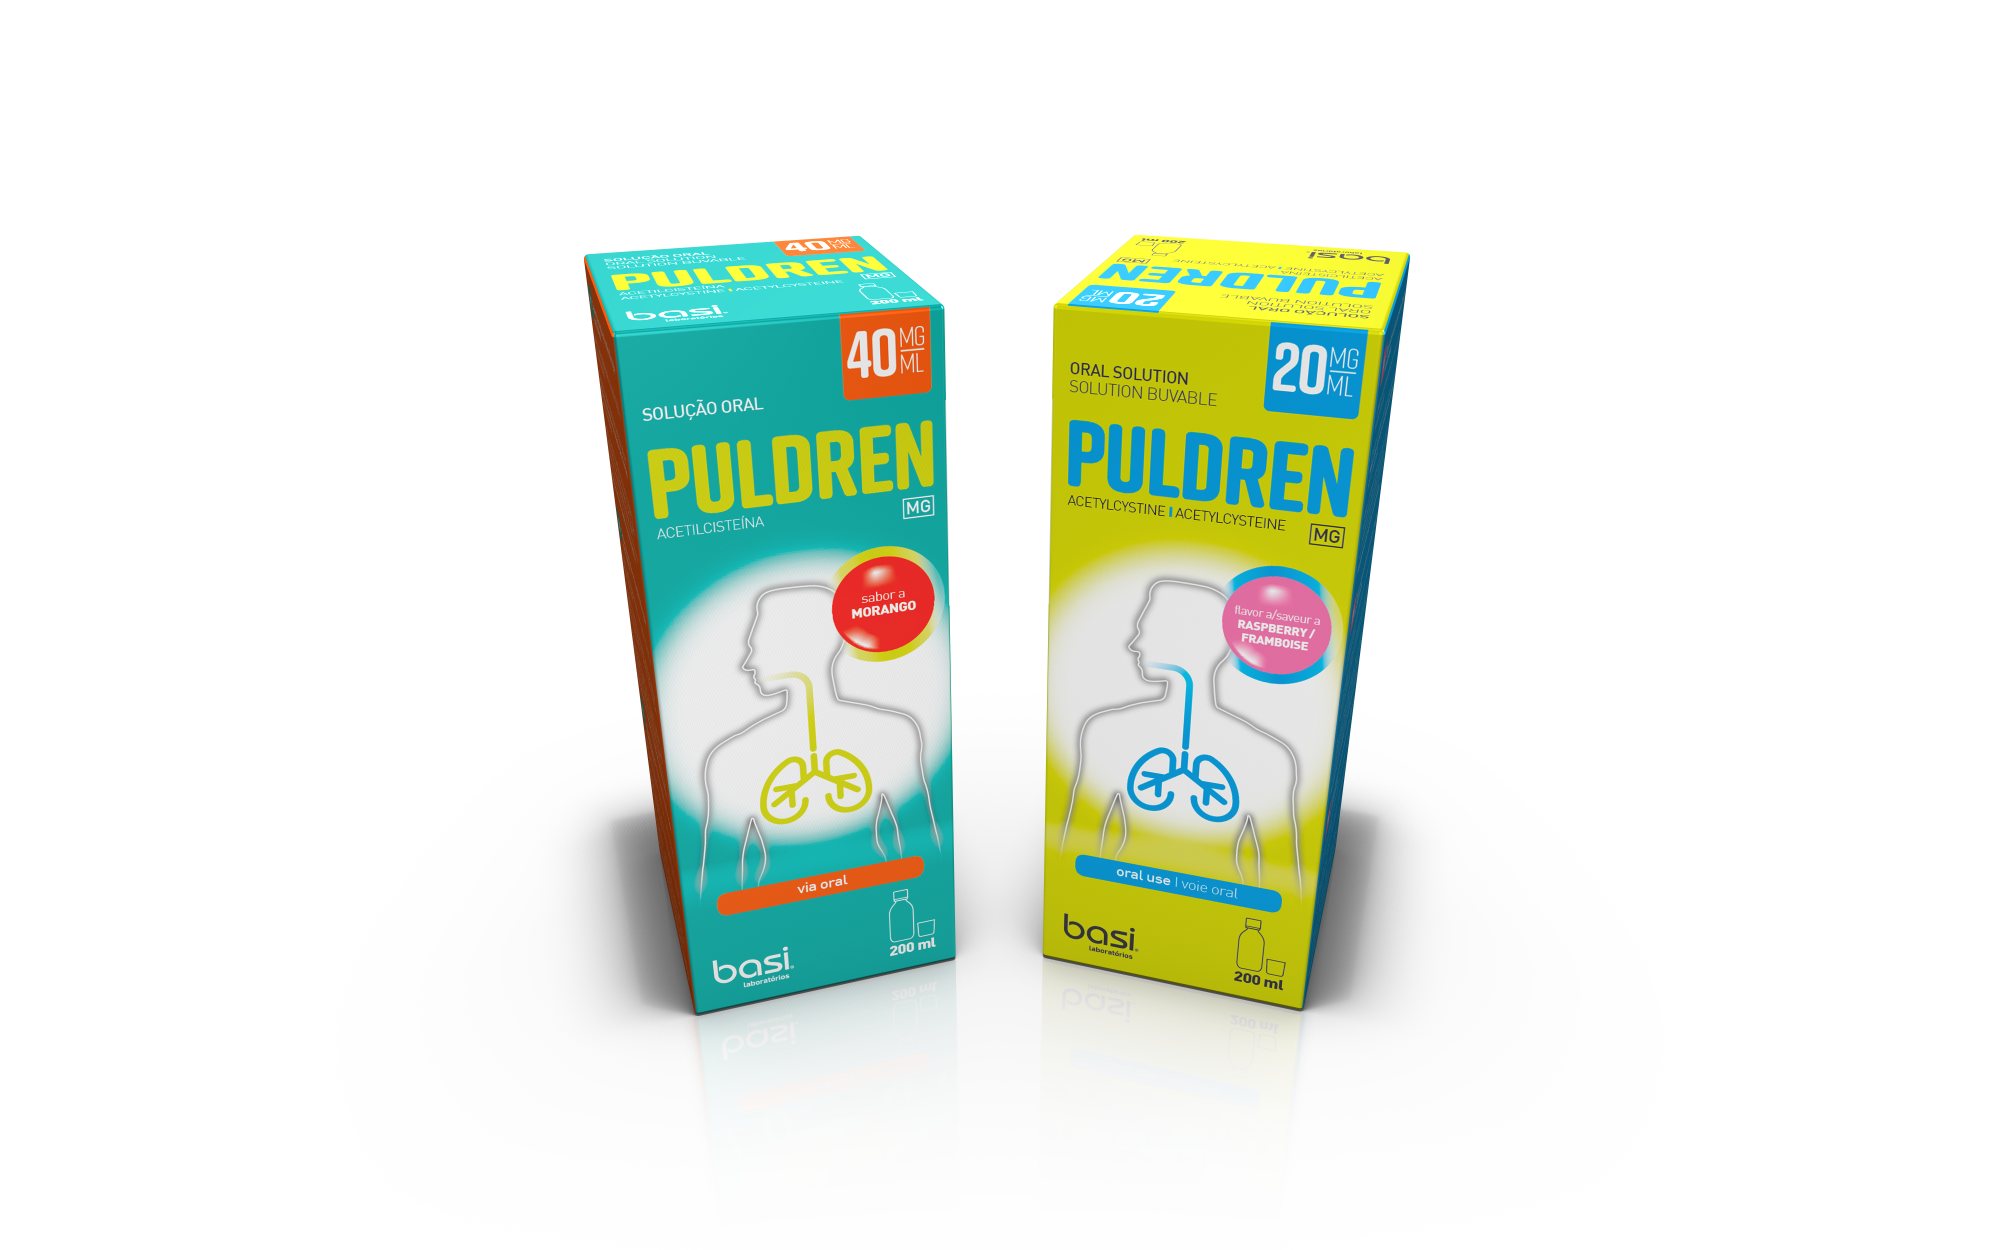 Puldren® (Acetylcysteine) Oral Solution 20 mg/ml and 40 mg/ml